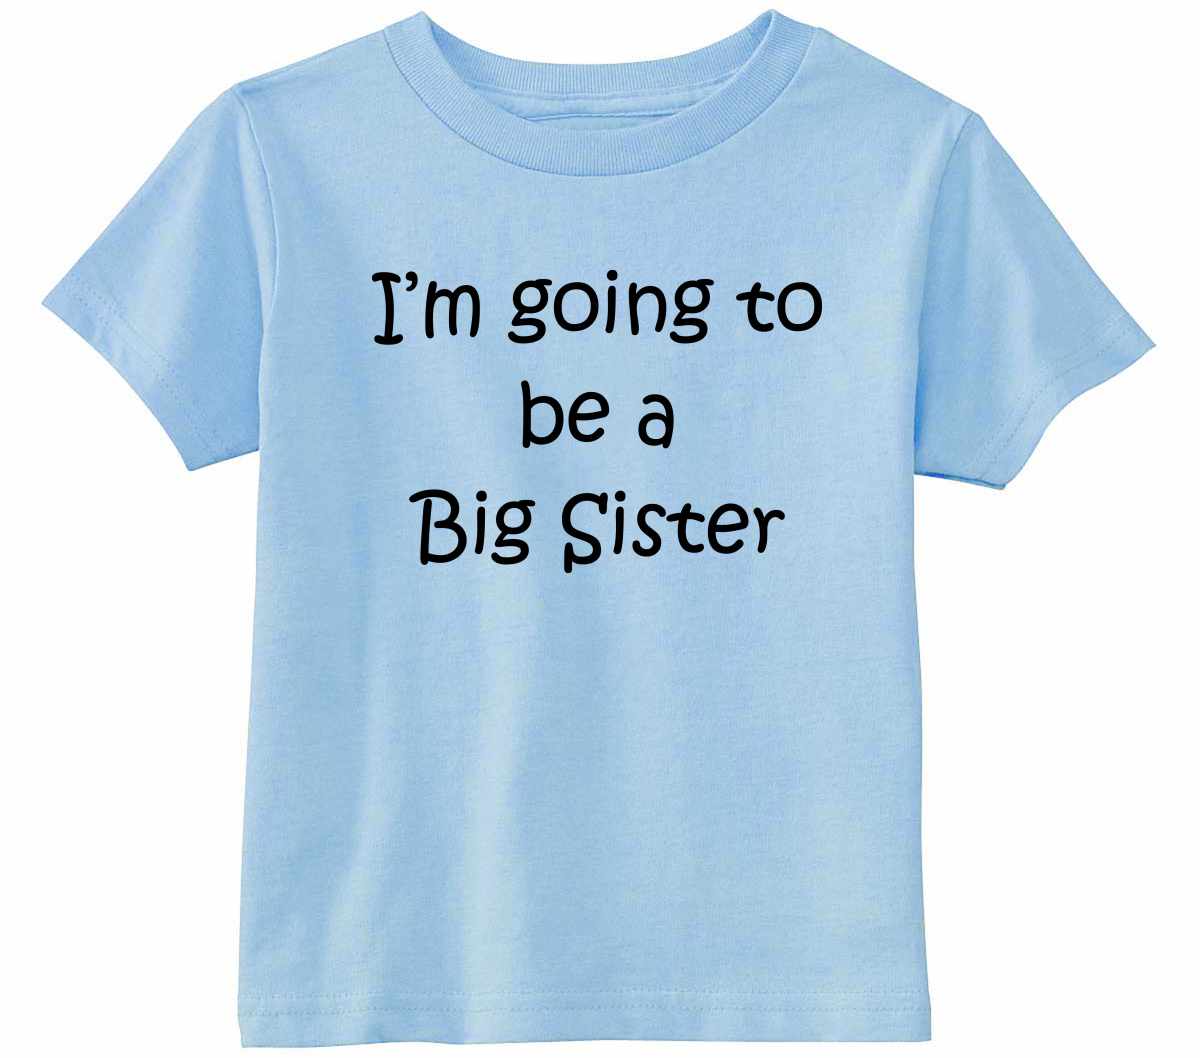 I'M GOING TO BE A BIG SISTER Infant/Toddler  (#587-7)